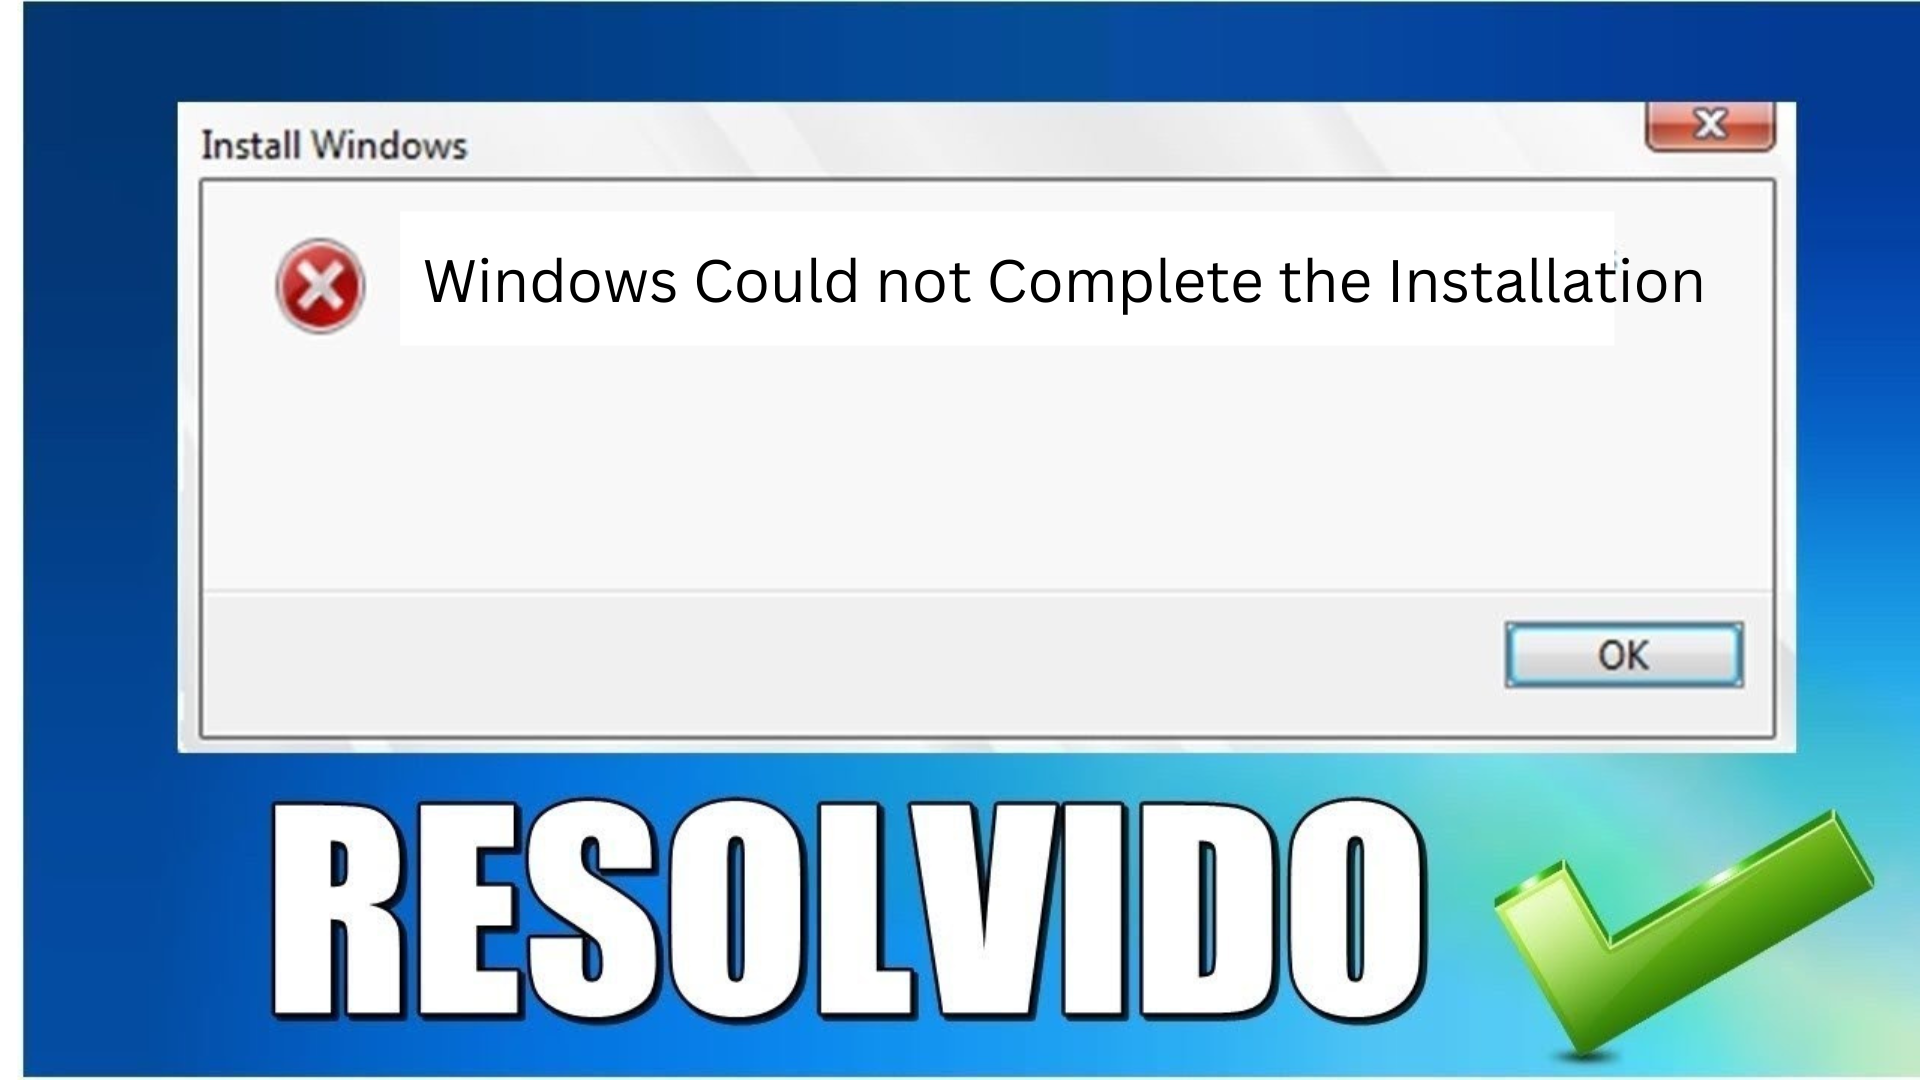 Windows Could not Complete the Installation